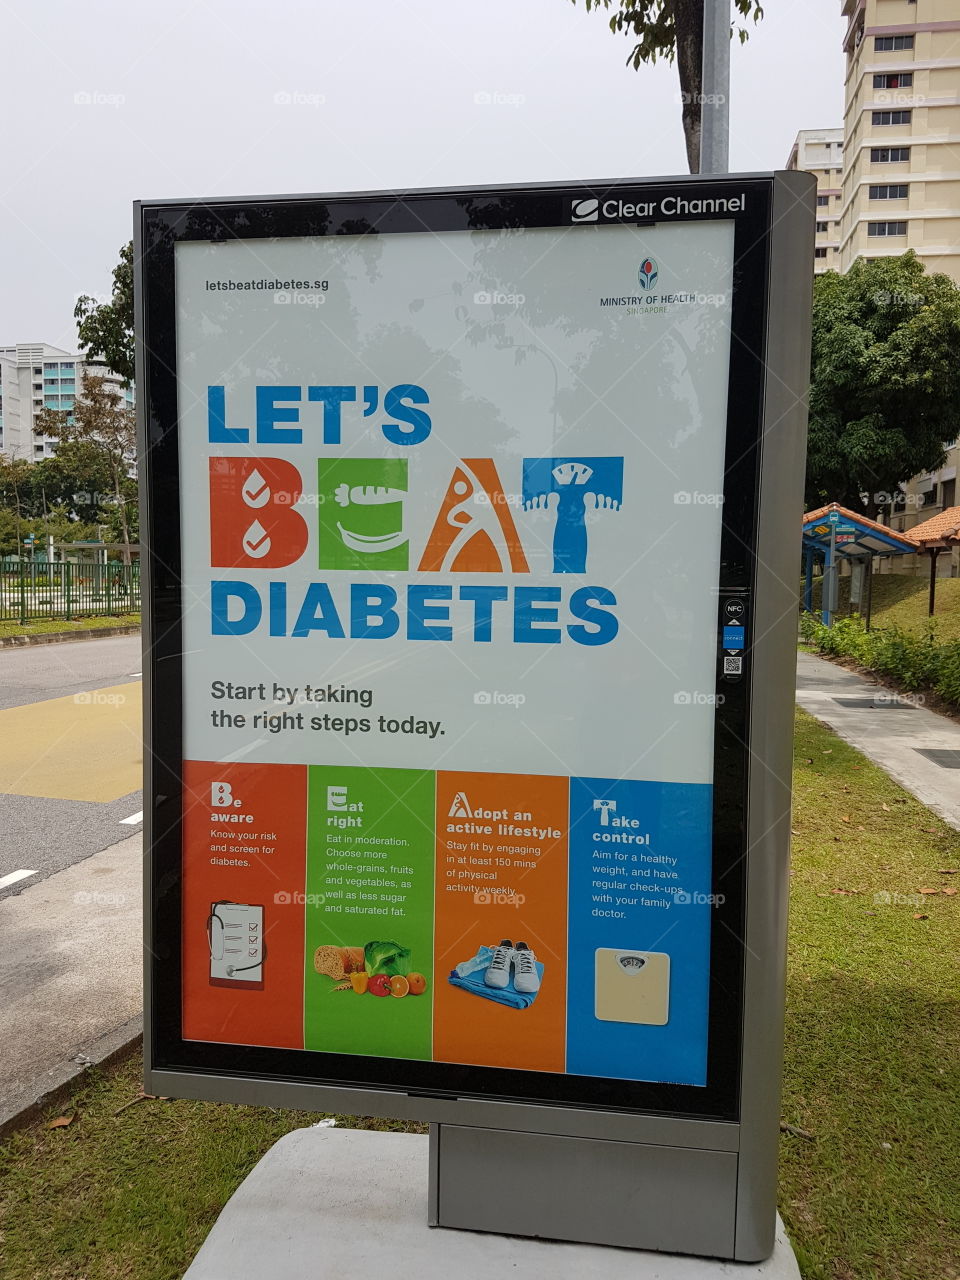 lets "BEAT" Diabetes. Be aware, Eat right, Adopt an active lifestyle, Take control.